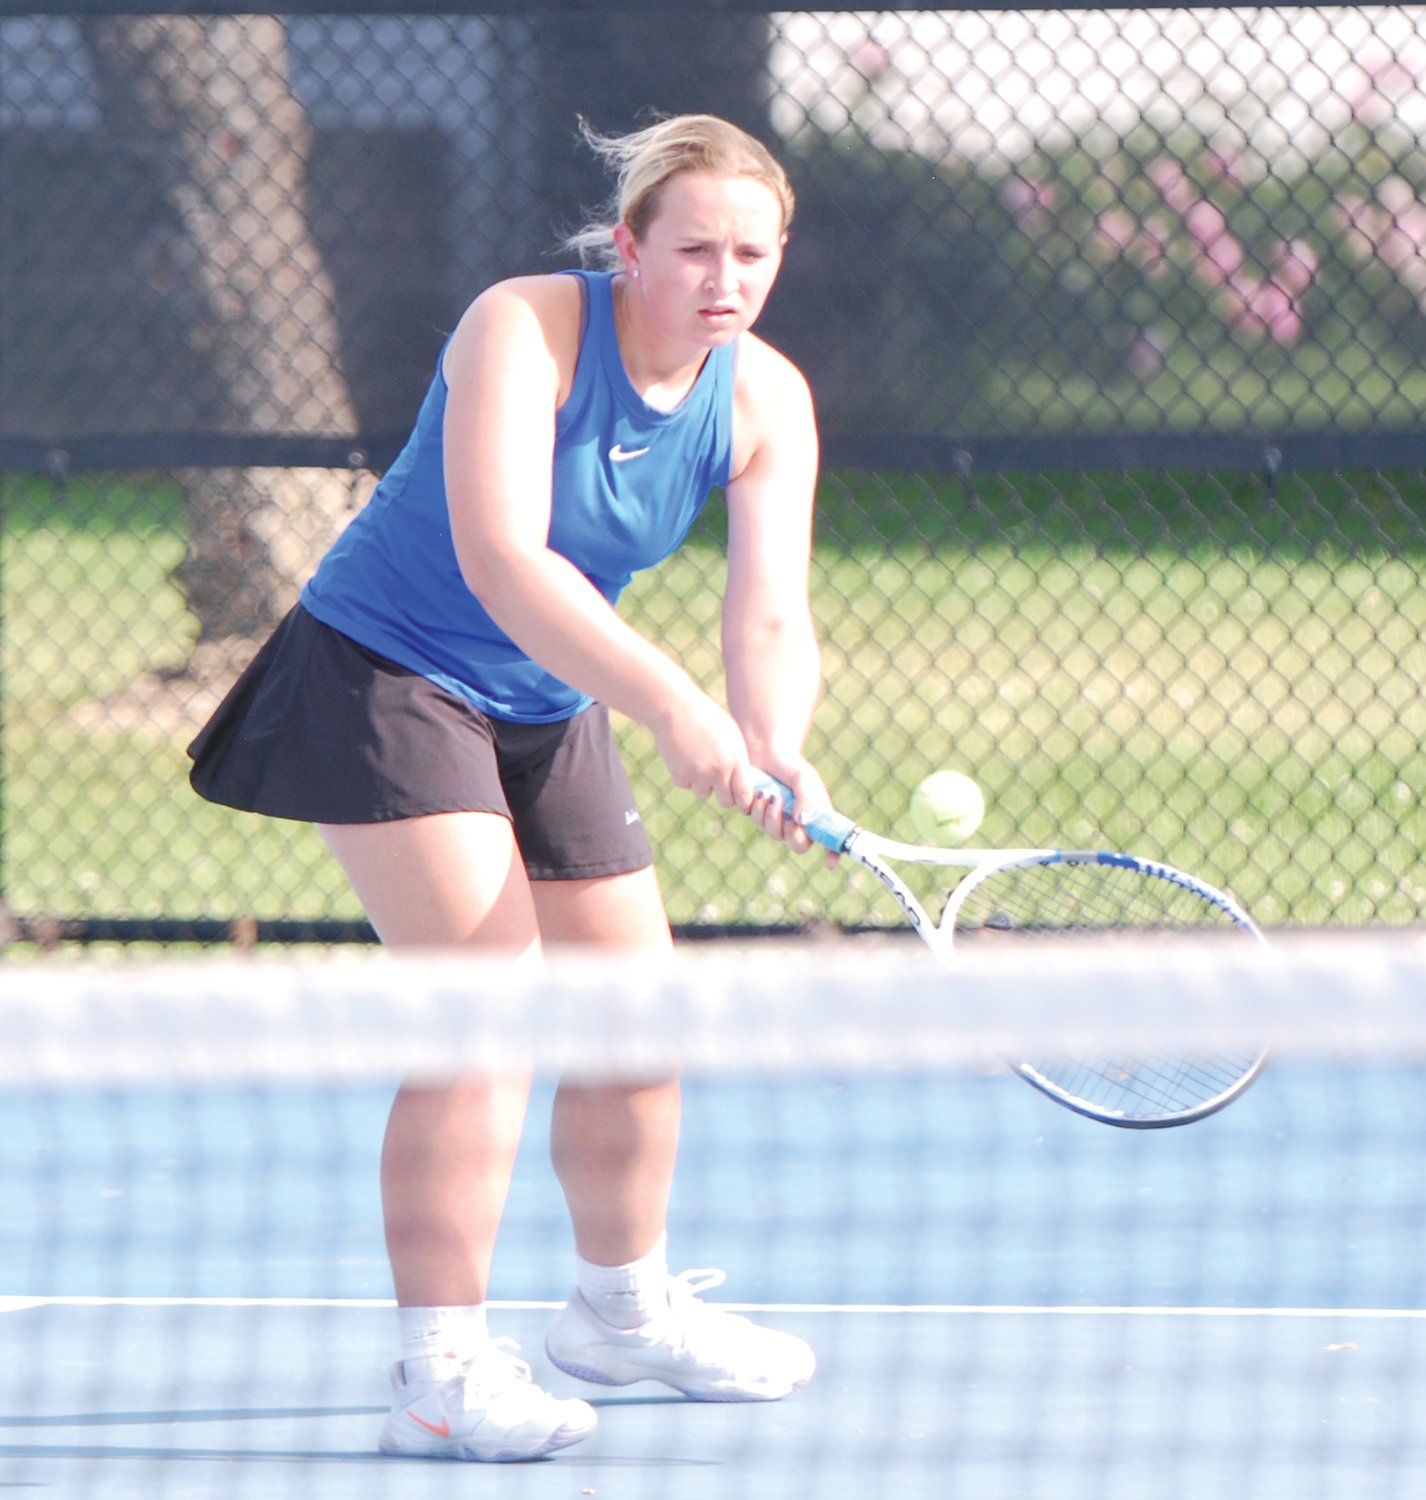 Crawfordsville freshman Samantha Rohr won easily at No. 3 singles against Covington in the regional final on Tuesday.